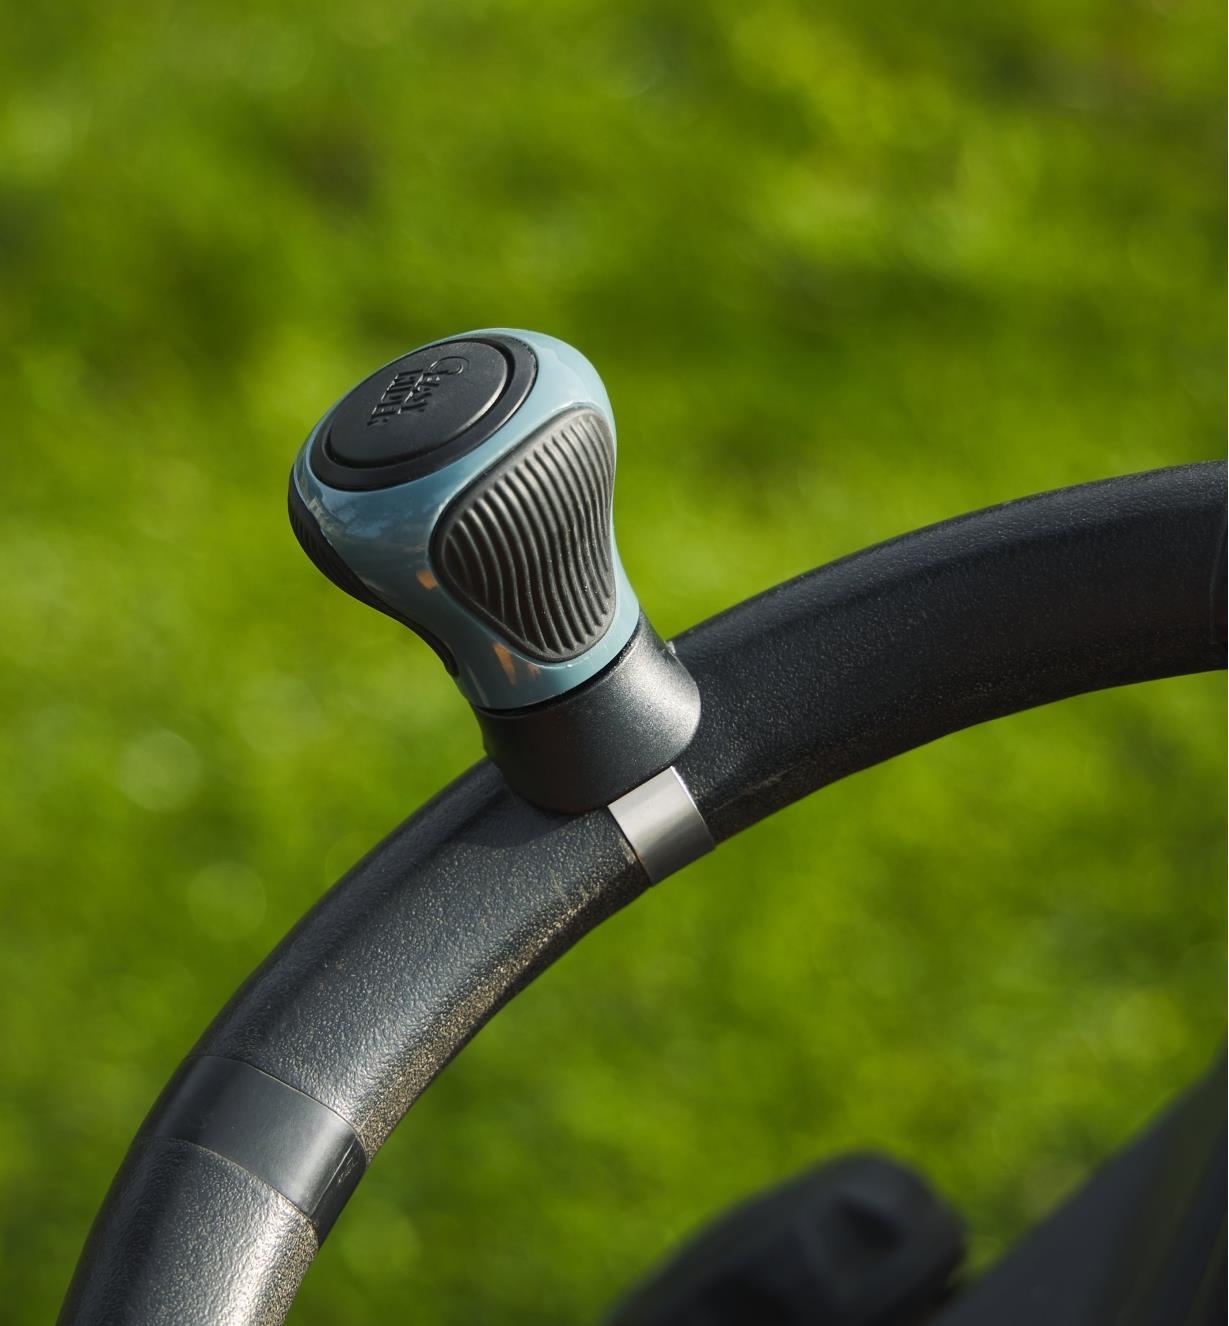 A steering knob attached to a steering wheel